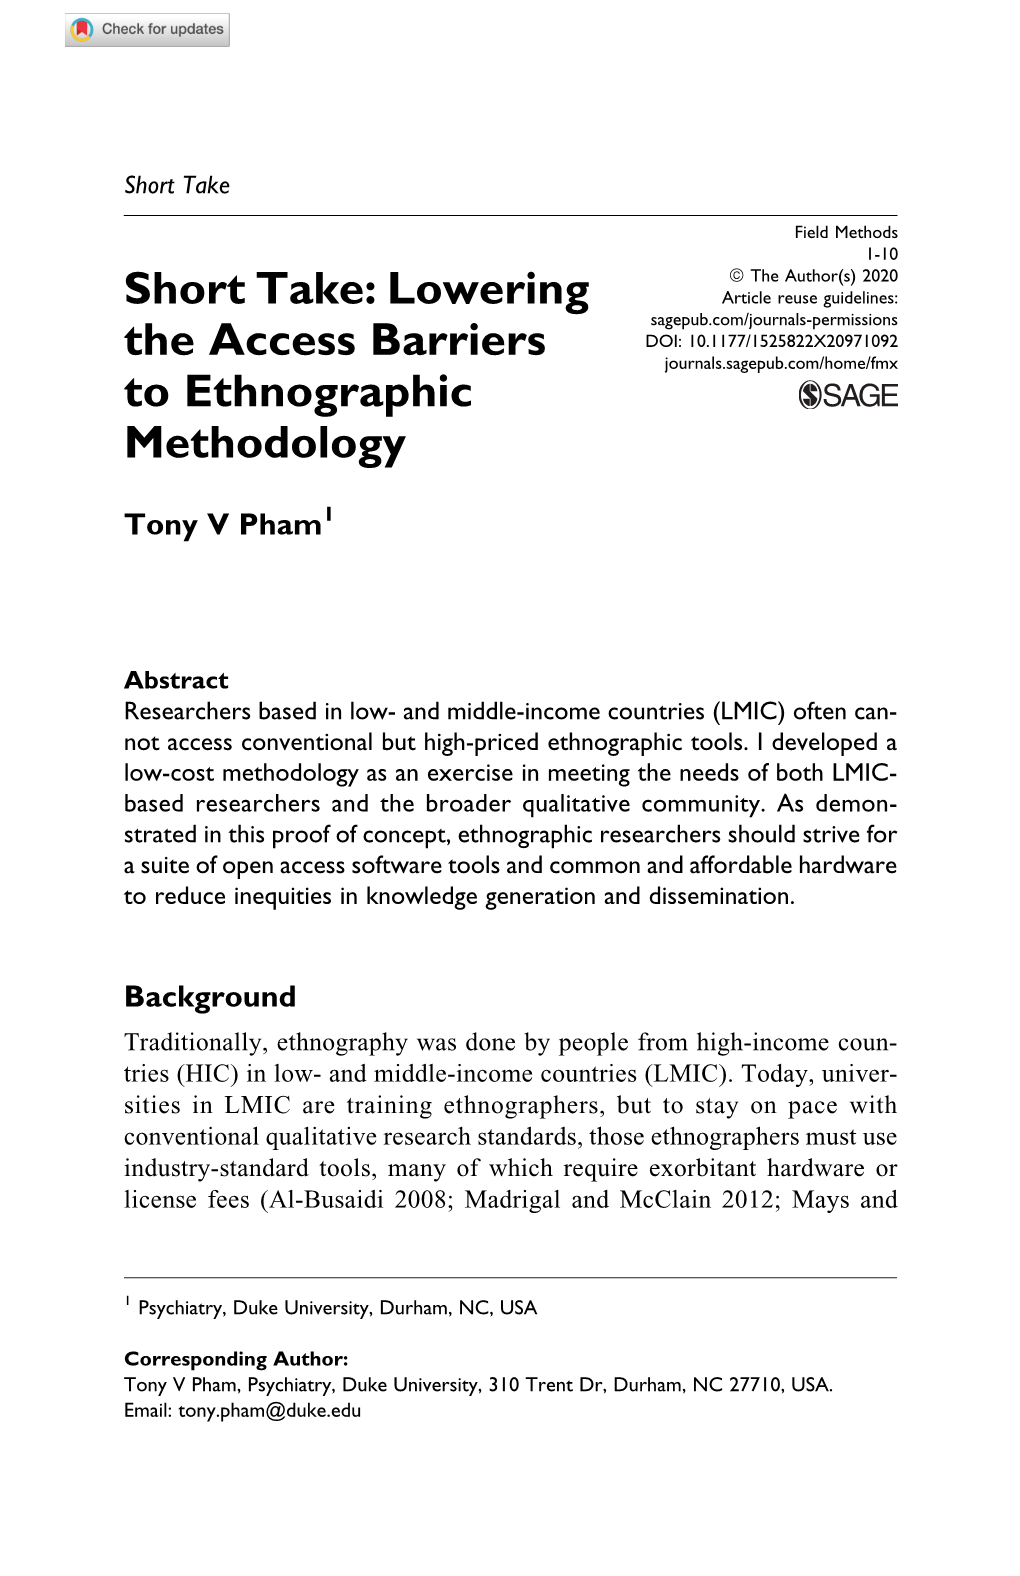 Short Take: Lowering the Access Barriers to Ethnographic Methodology